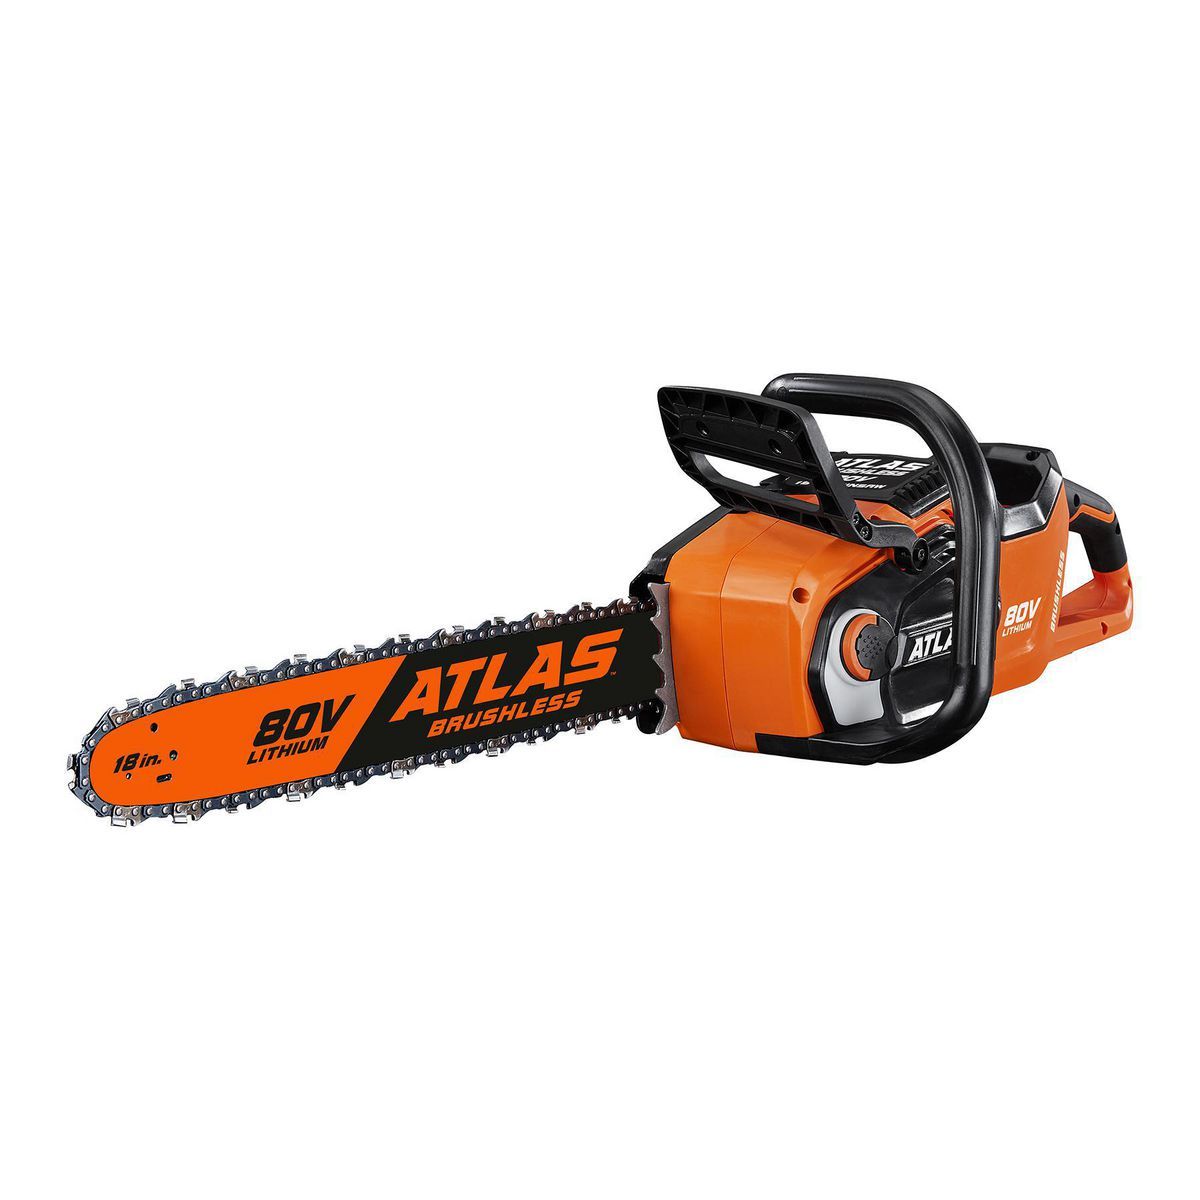 ATLAS 80v Lithium-Ion Cordless 18 in. Brushless Chainsaw – Tool Only